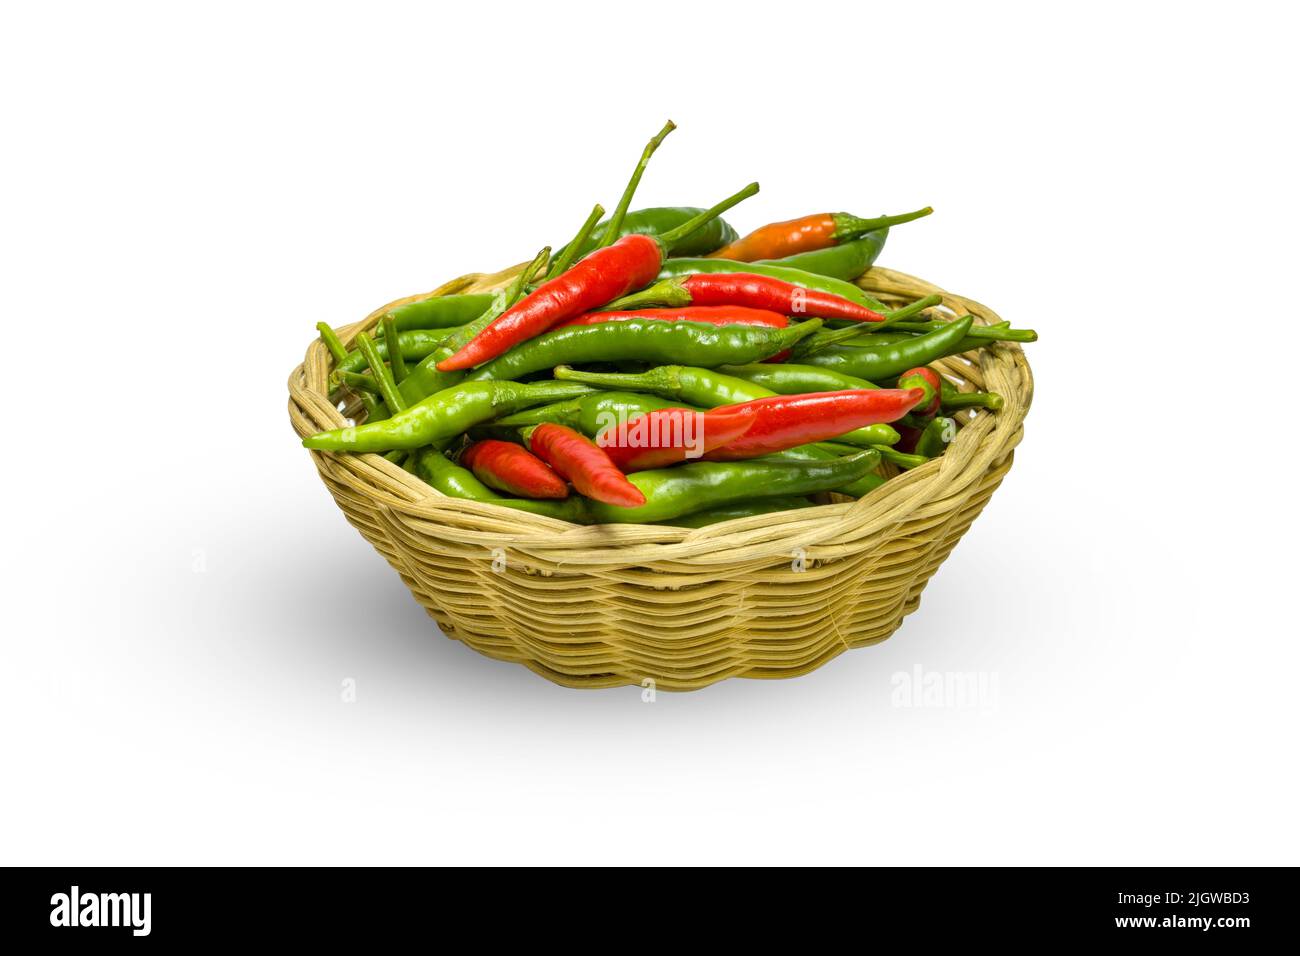 Fresh chili peppers in a basket on white background, chilis are hot and spicy Stock Photo